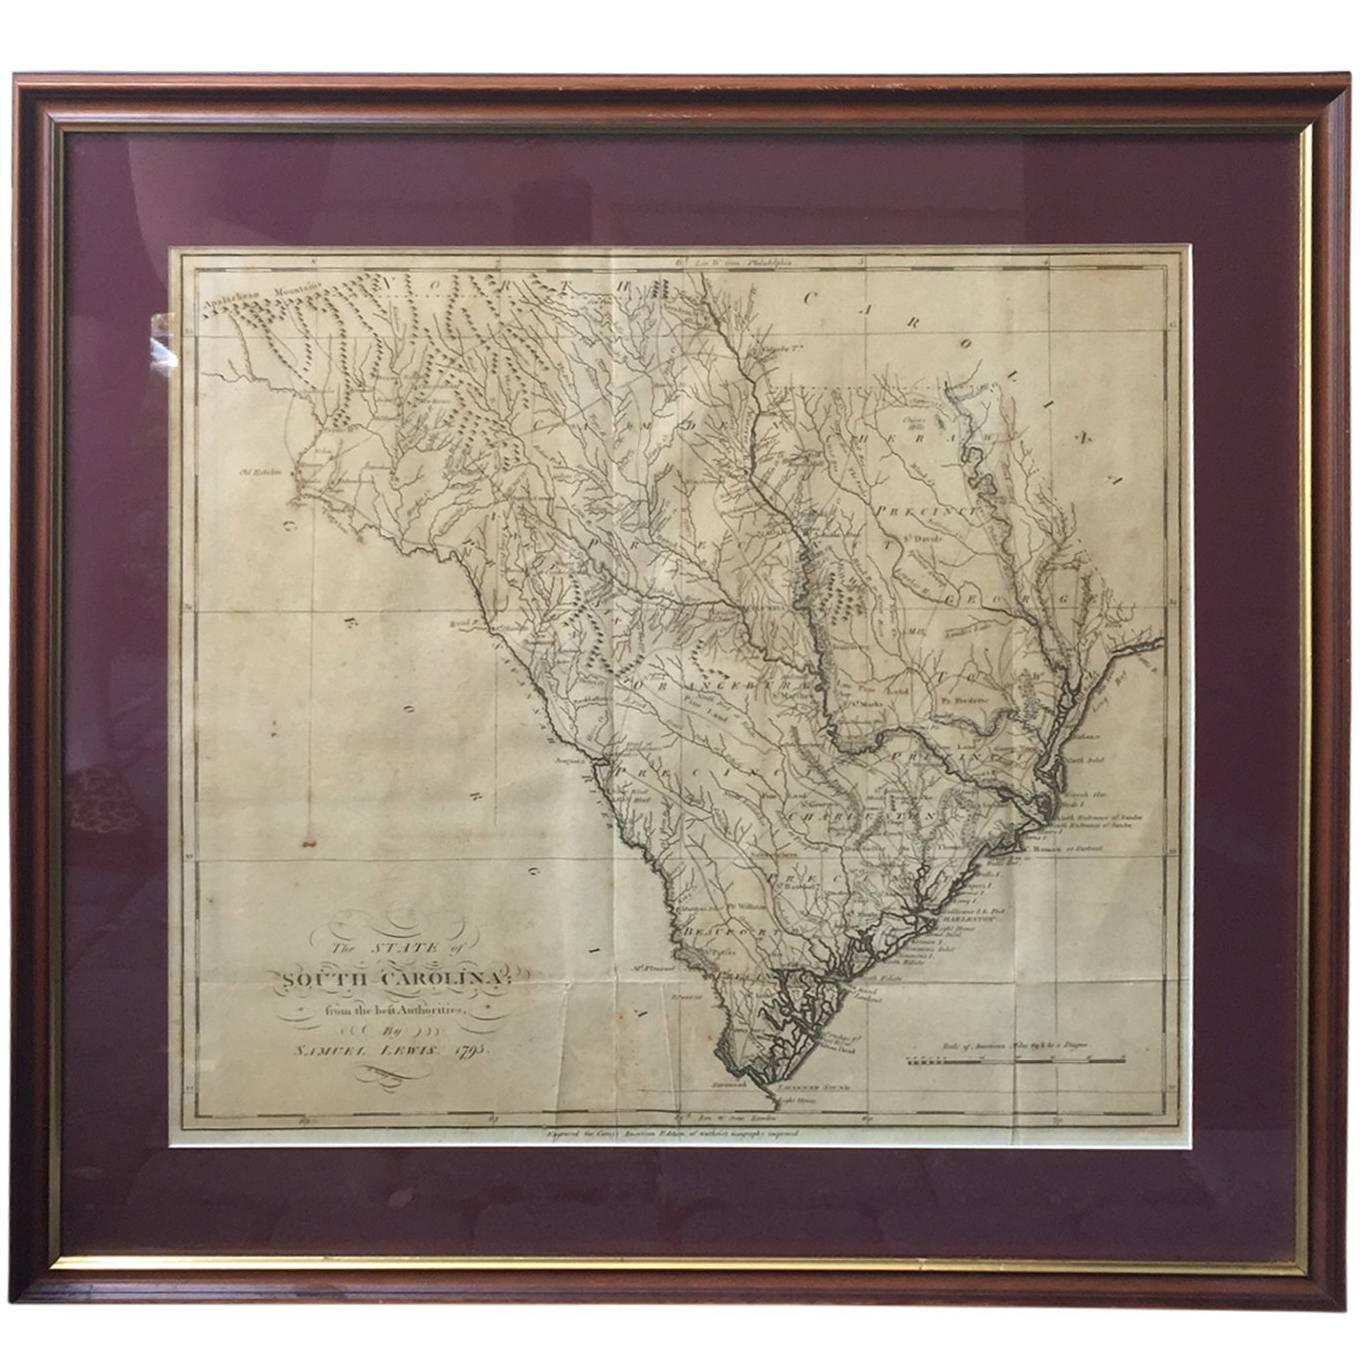 Lewis' the State of South Carolina, 1795 Map